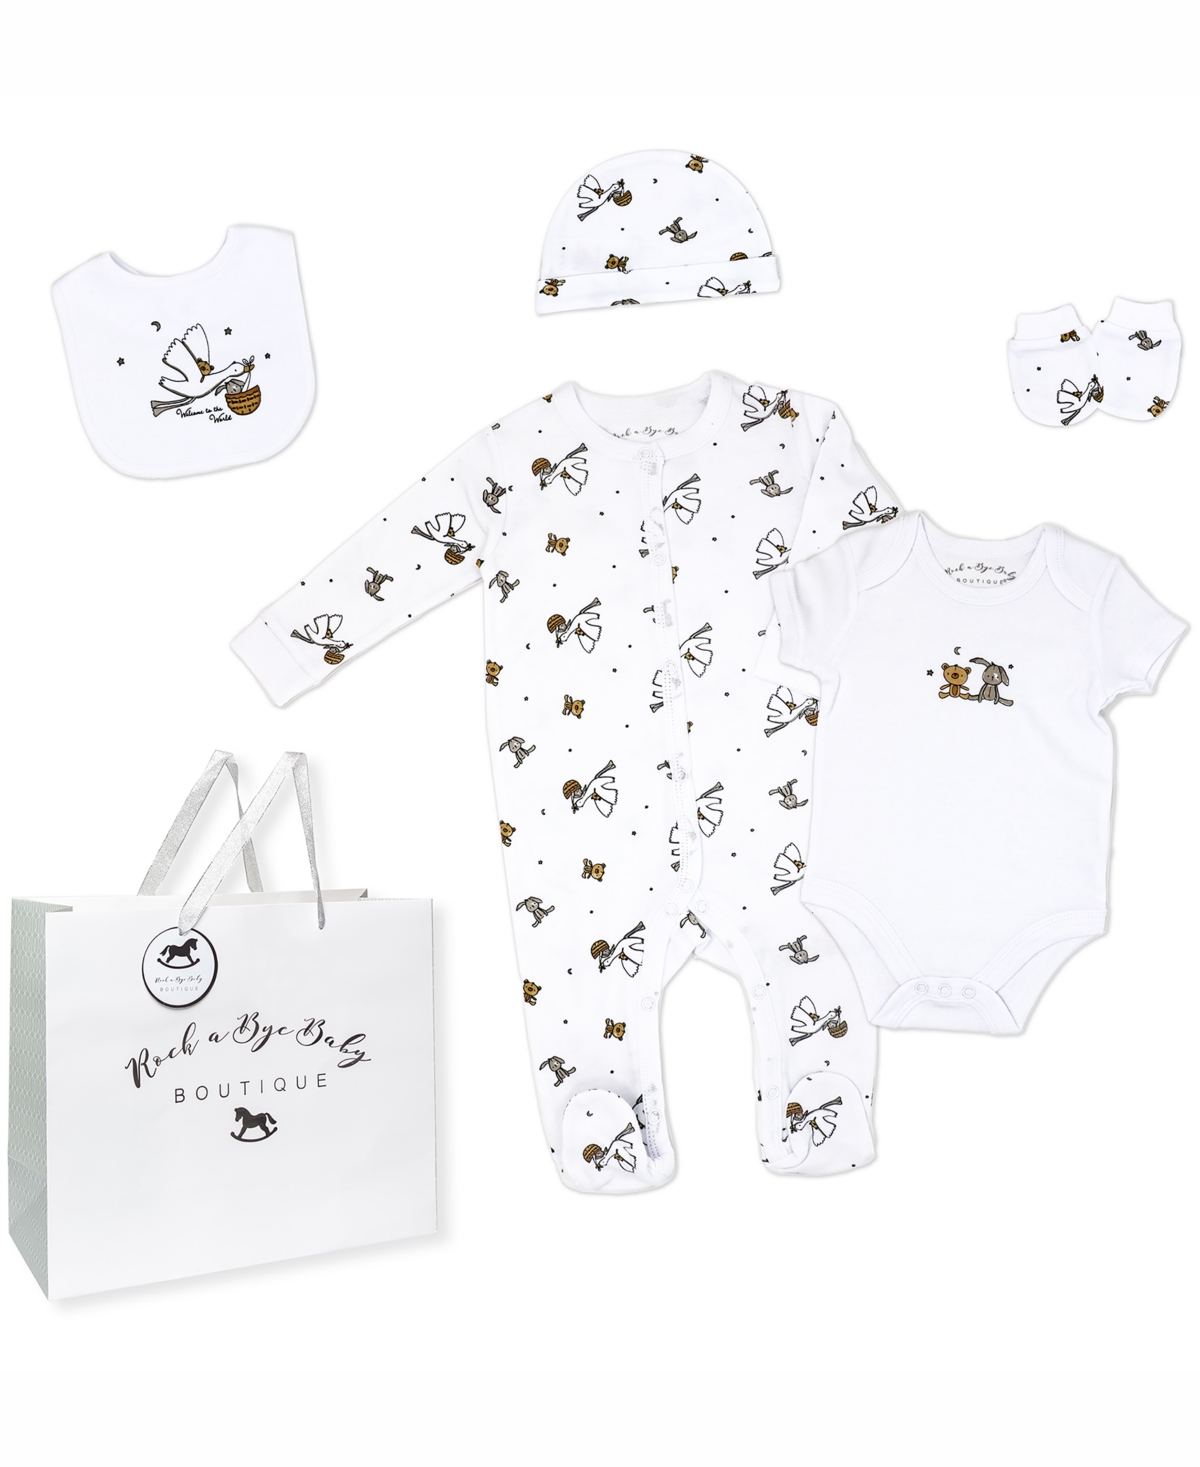 Rock-a-bye Baby Boutique Baby Boys Or Baby Girls Layette Gift Bag Set In Busy Stork